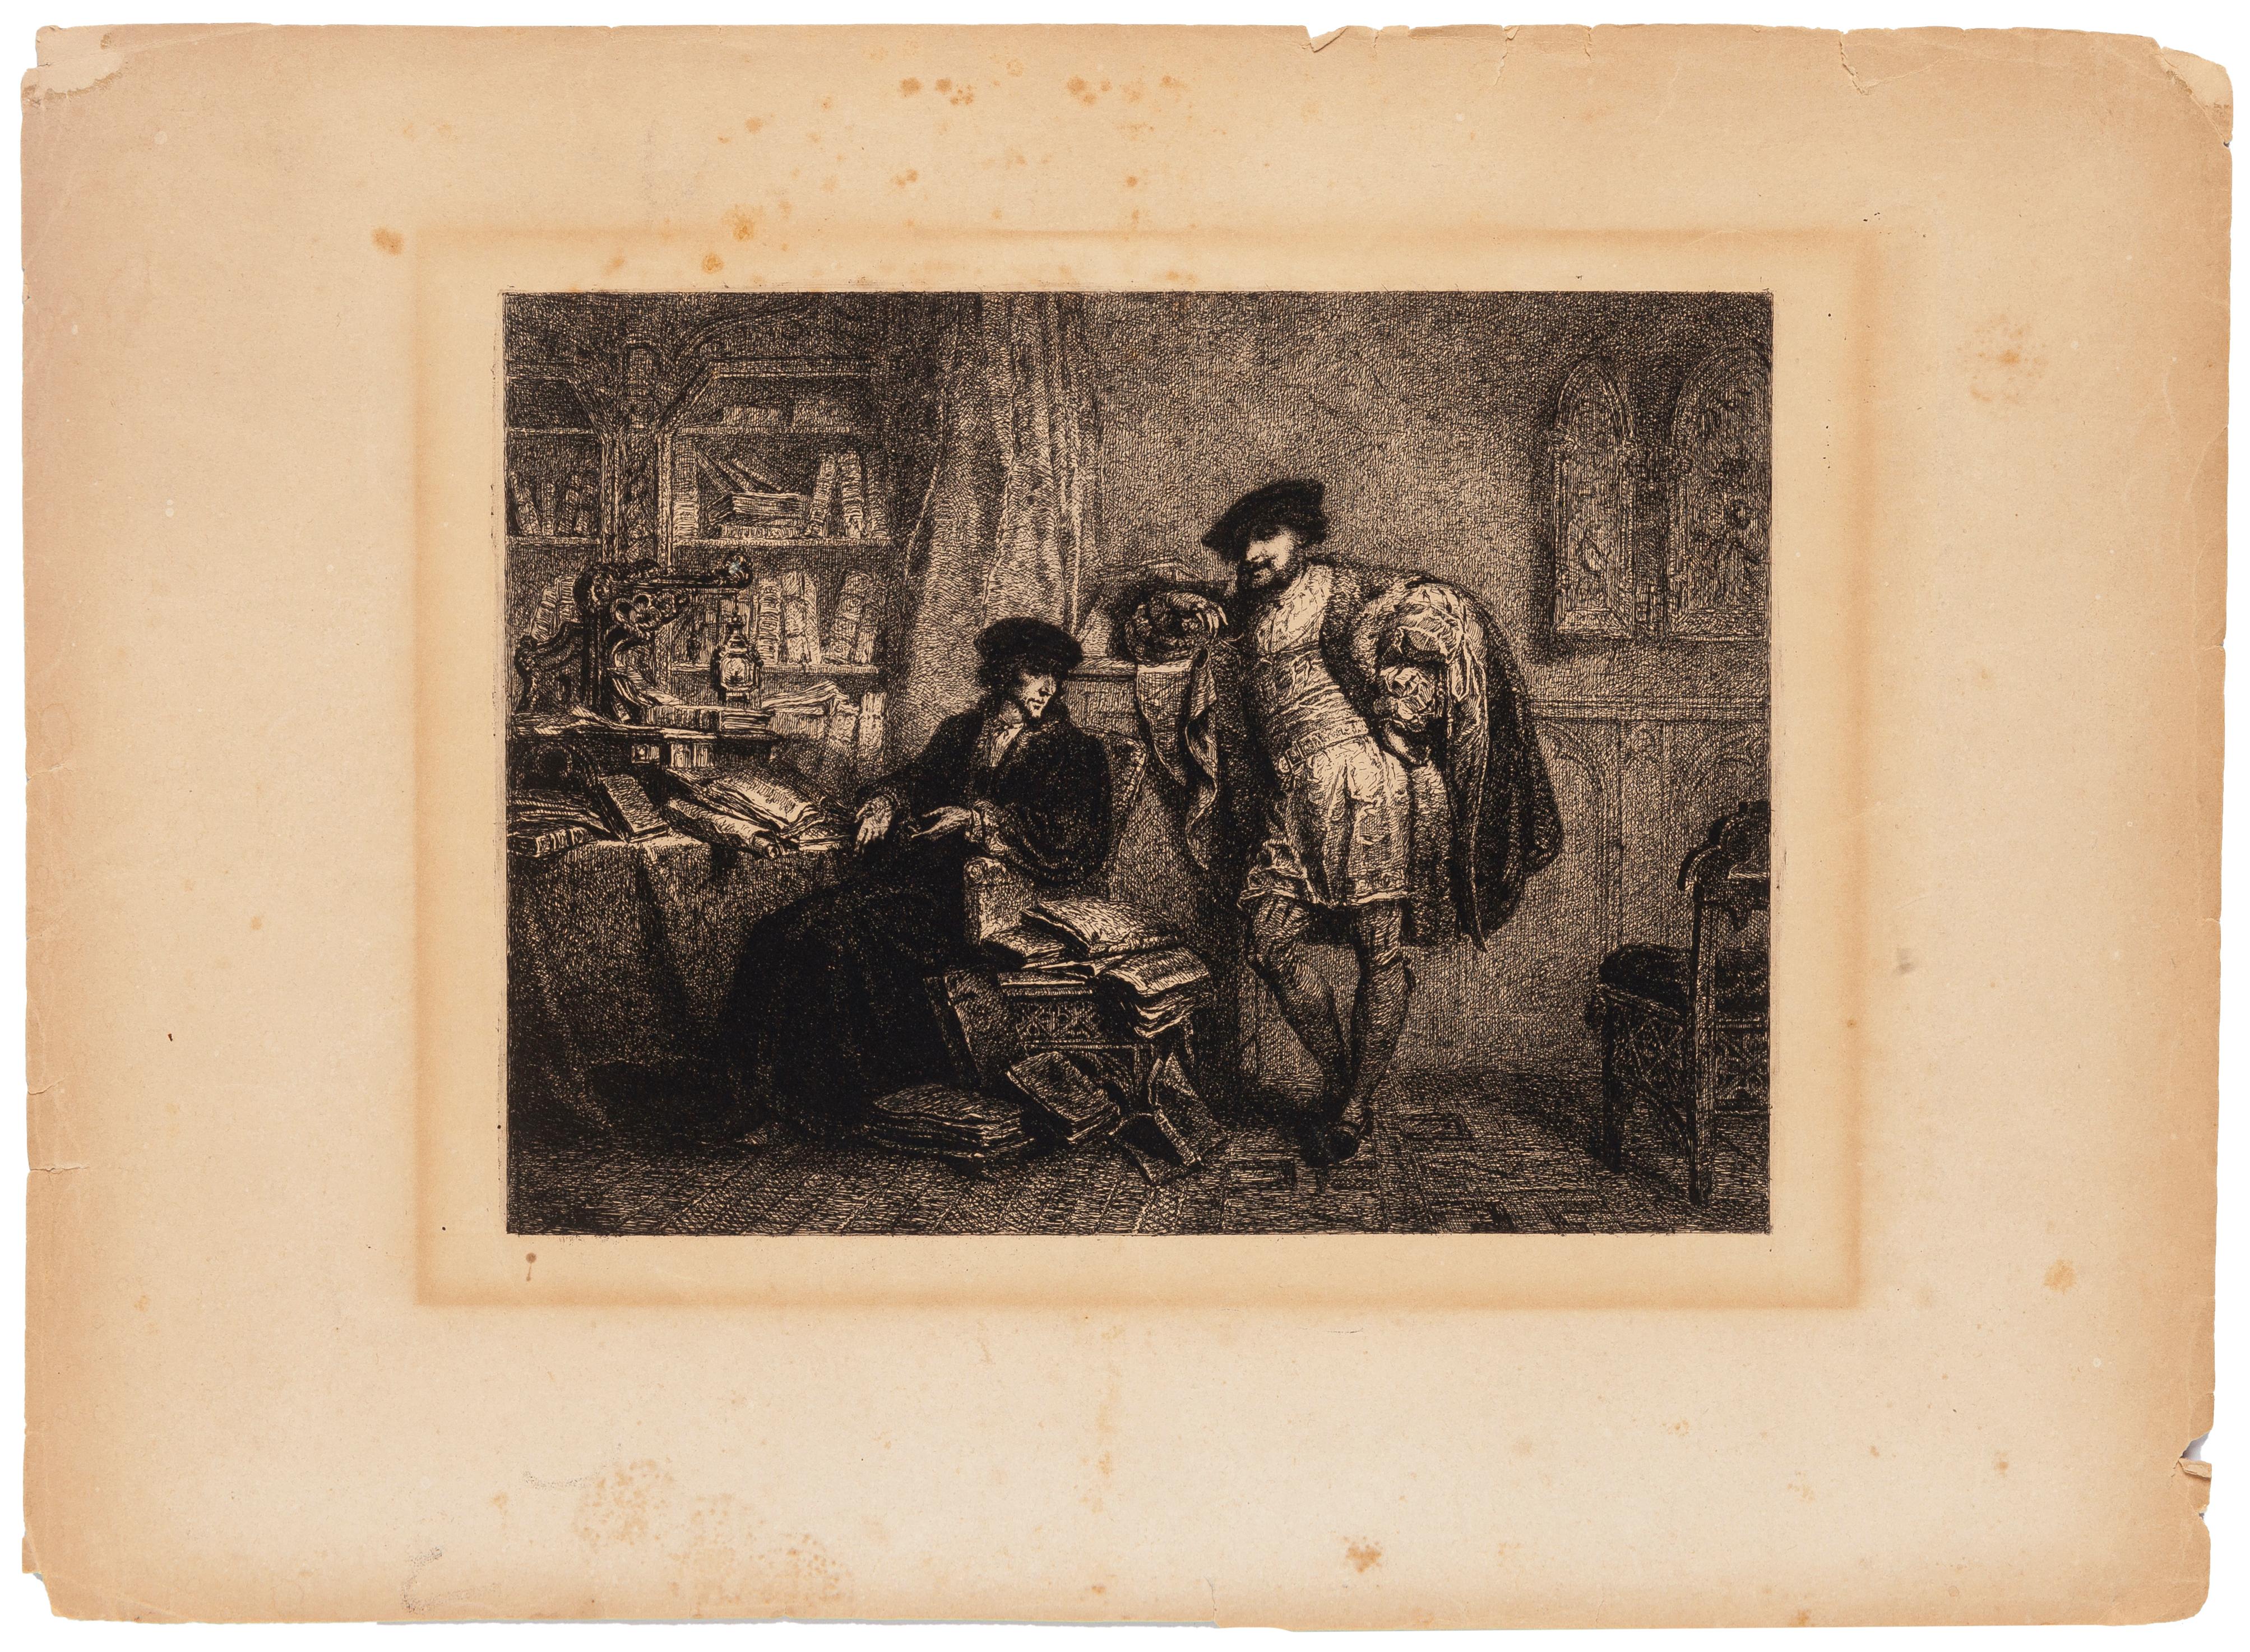 Men in Room - Original Etching - Early 19th Century - Print by Unknown